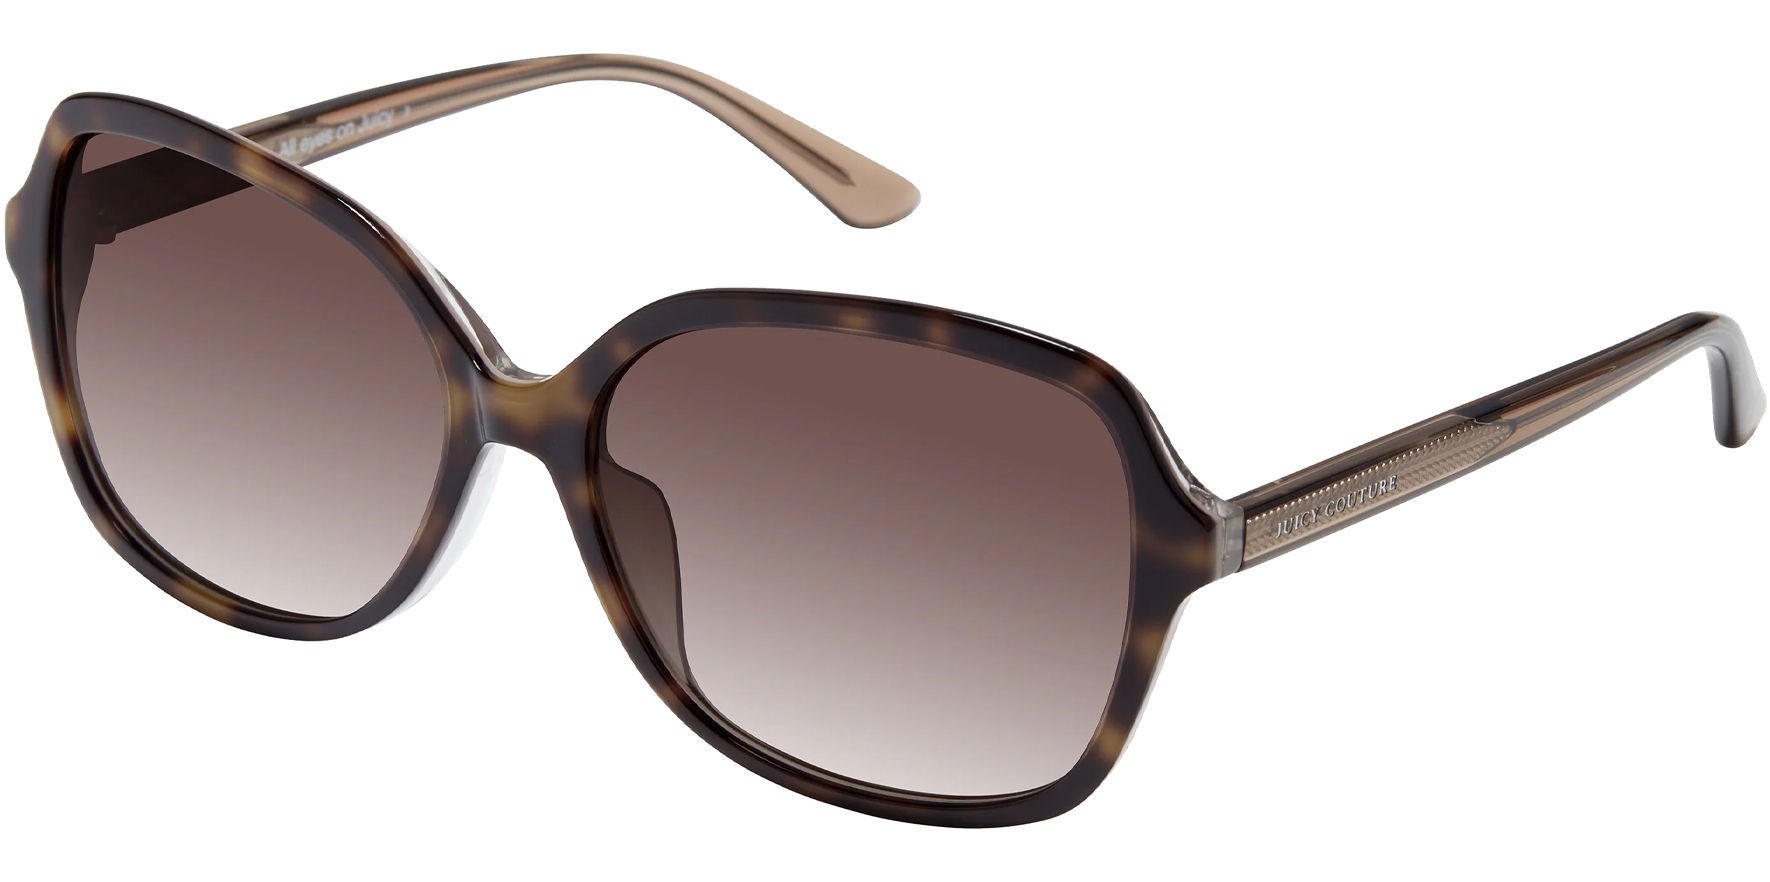 Juicy Couture Squared Butterfly w/ Gradient Lens